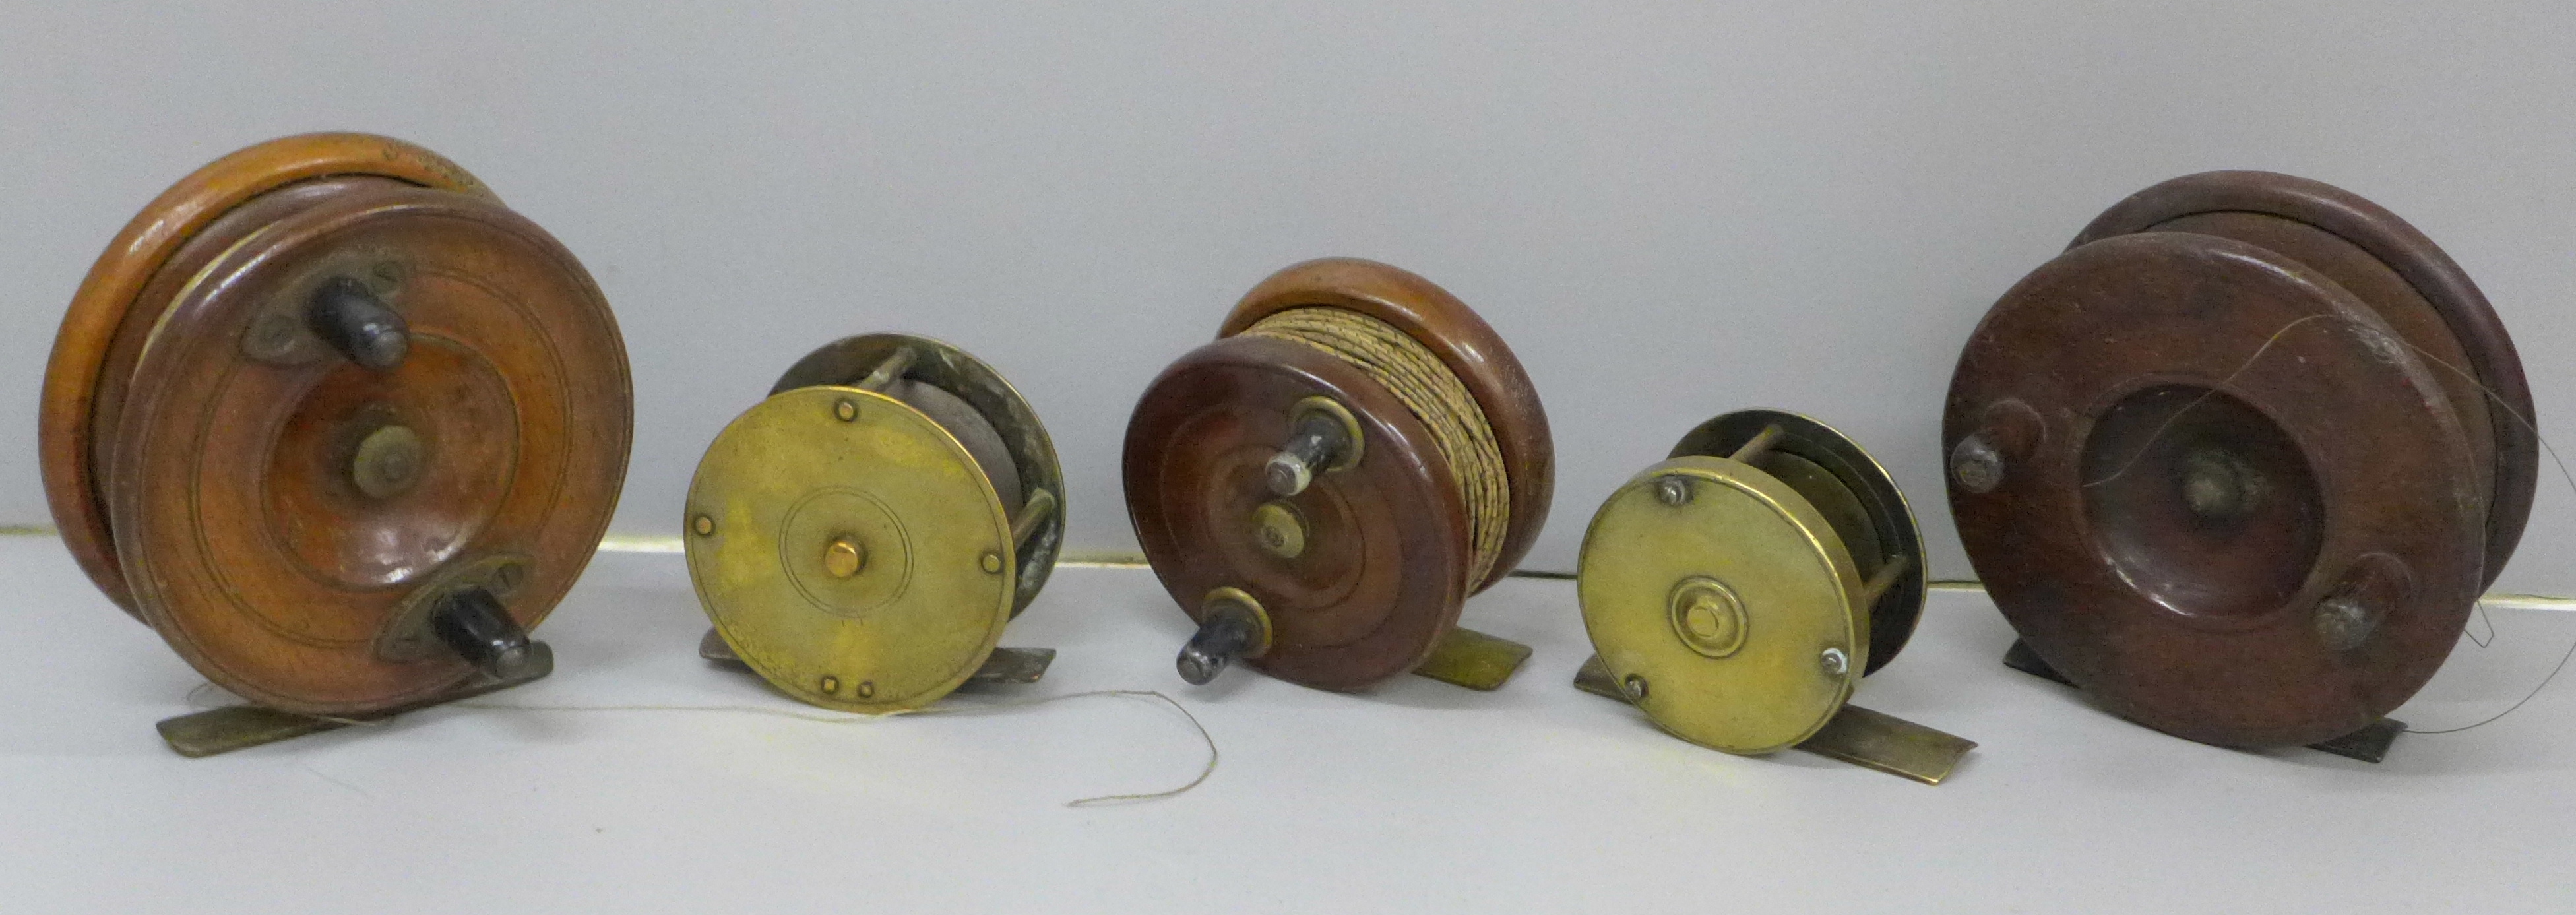 Three wooden and two brass fishing reels